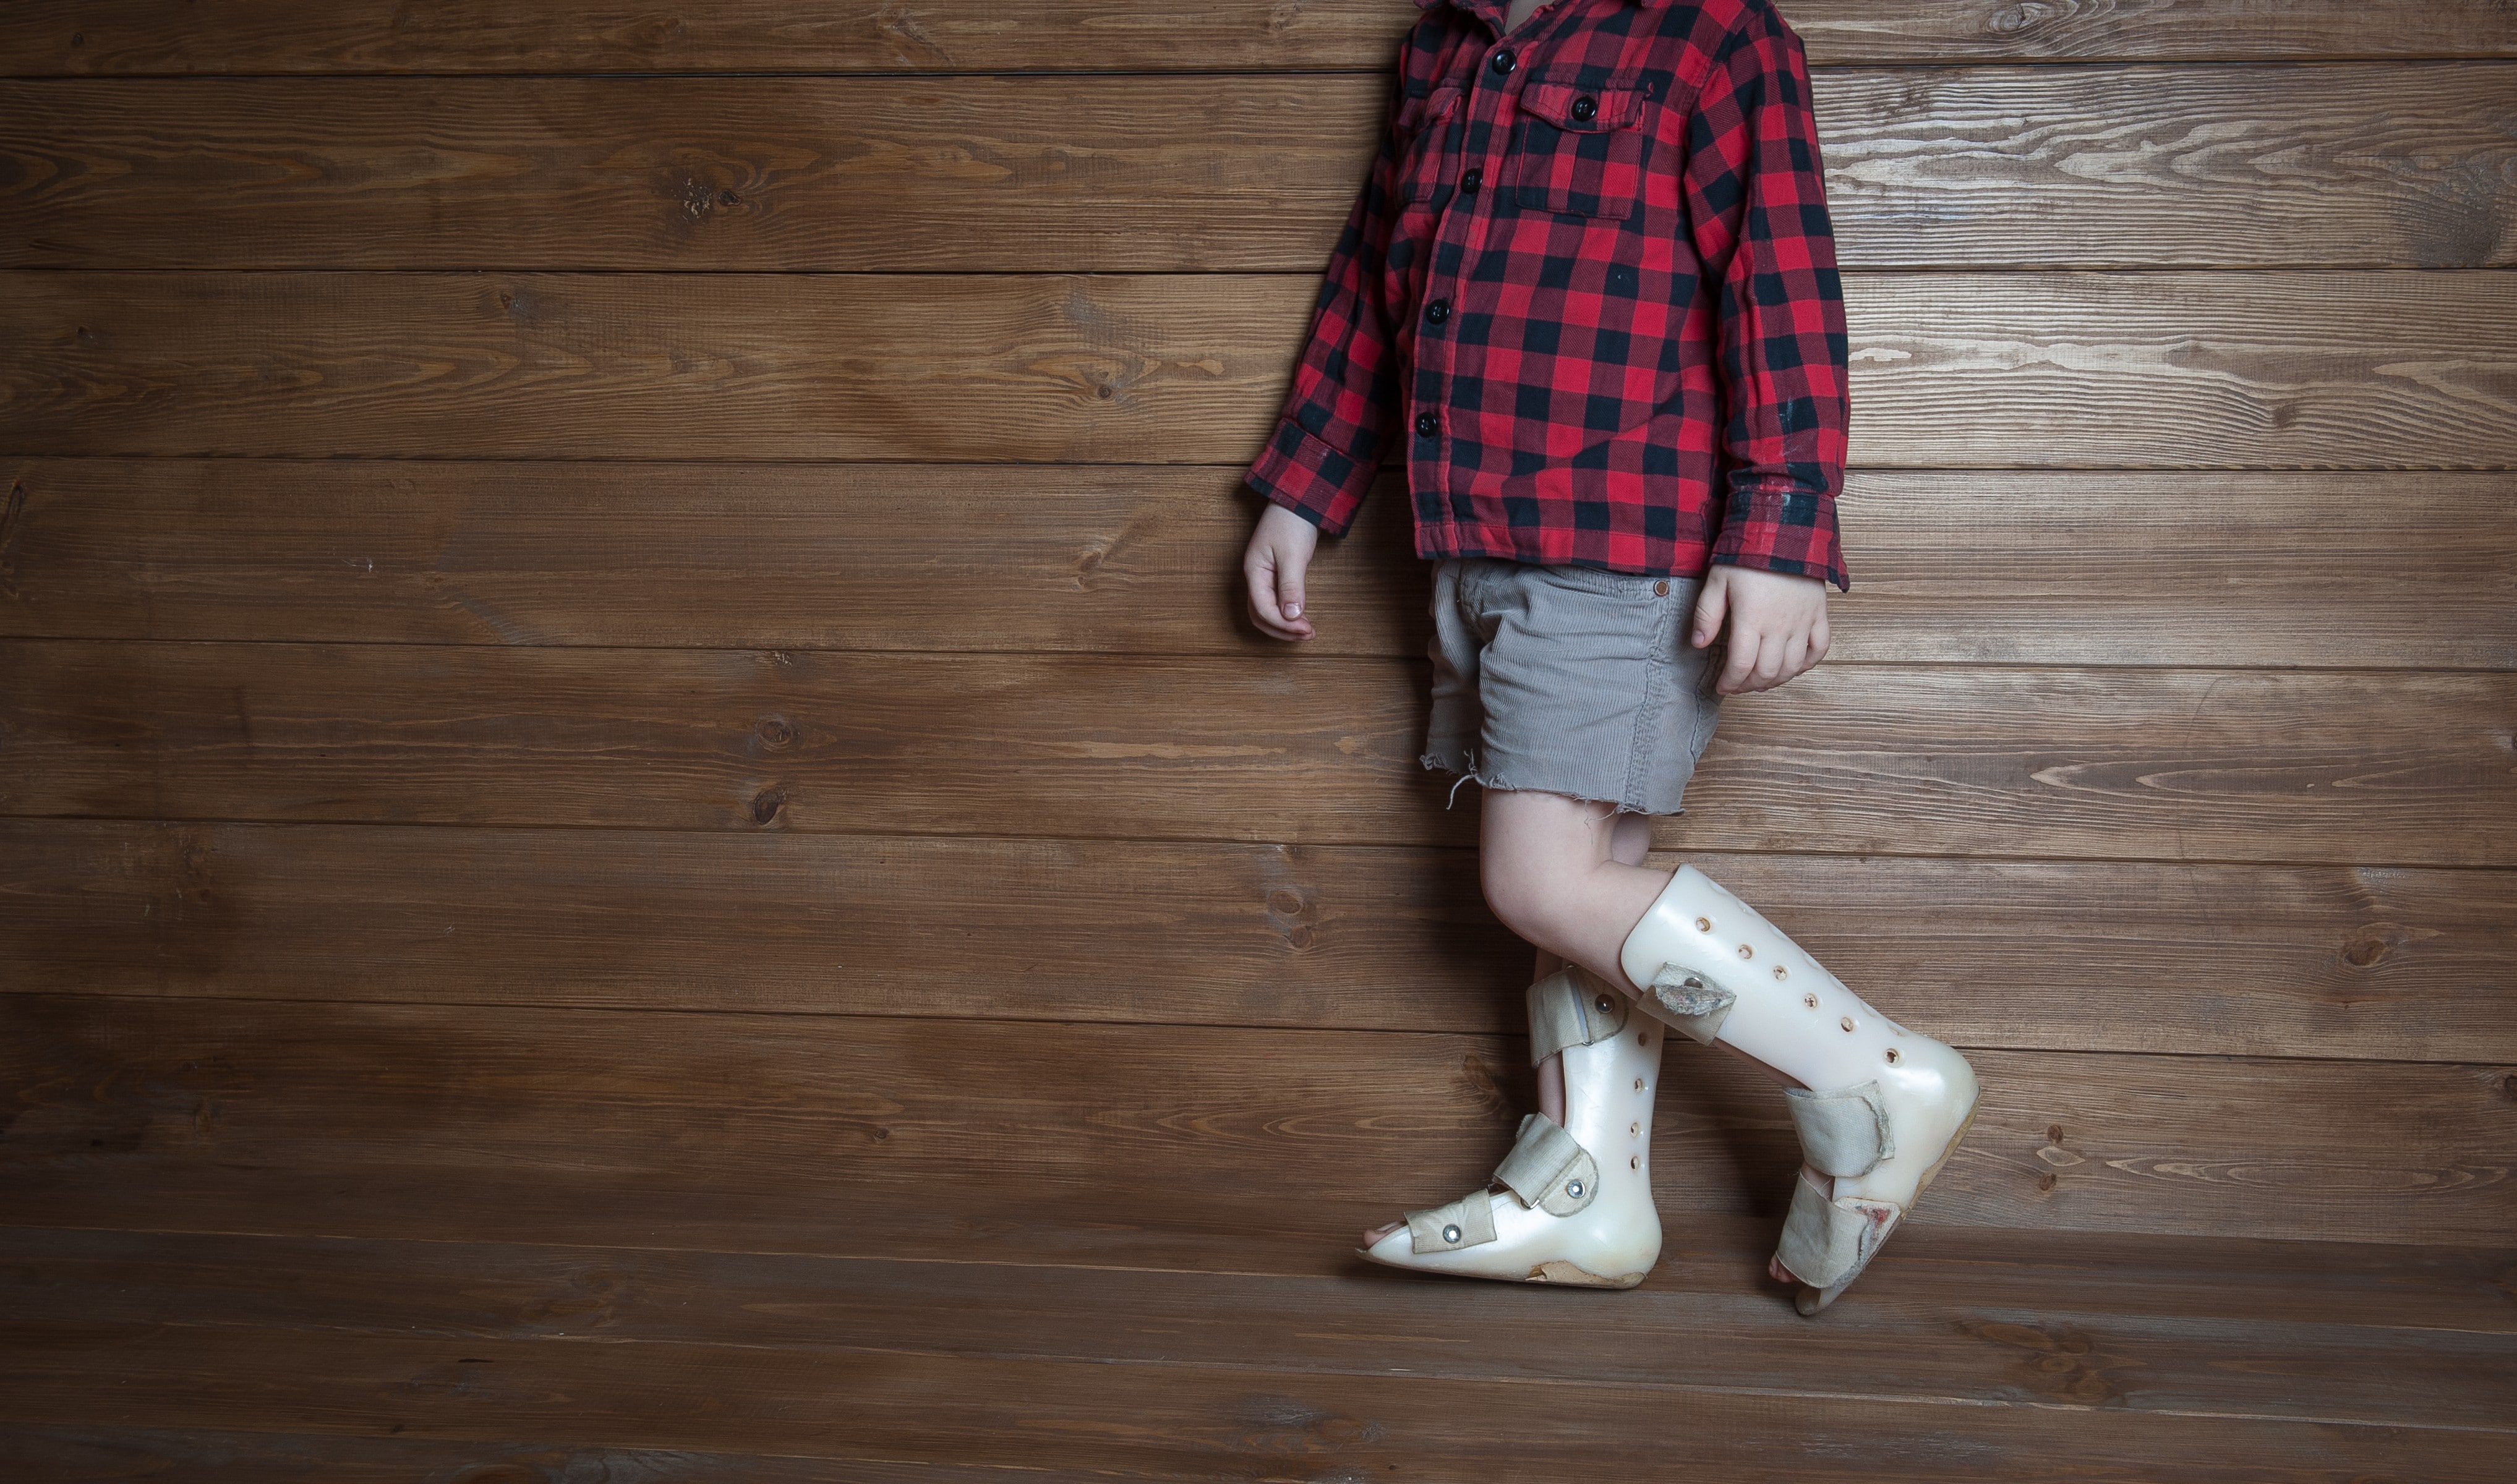 Child with Foot Brace